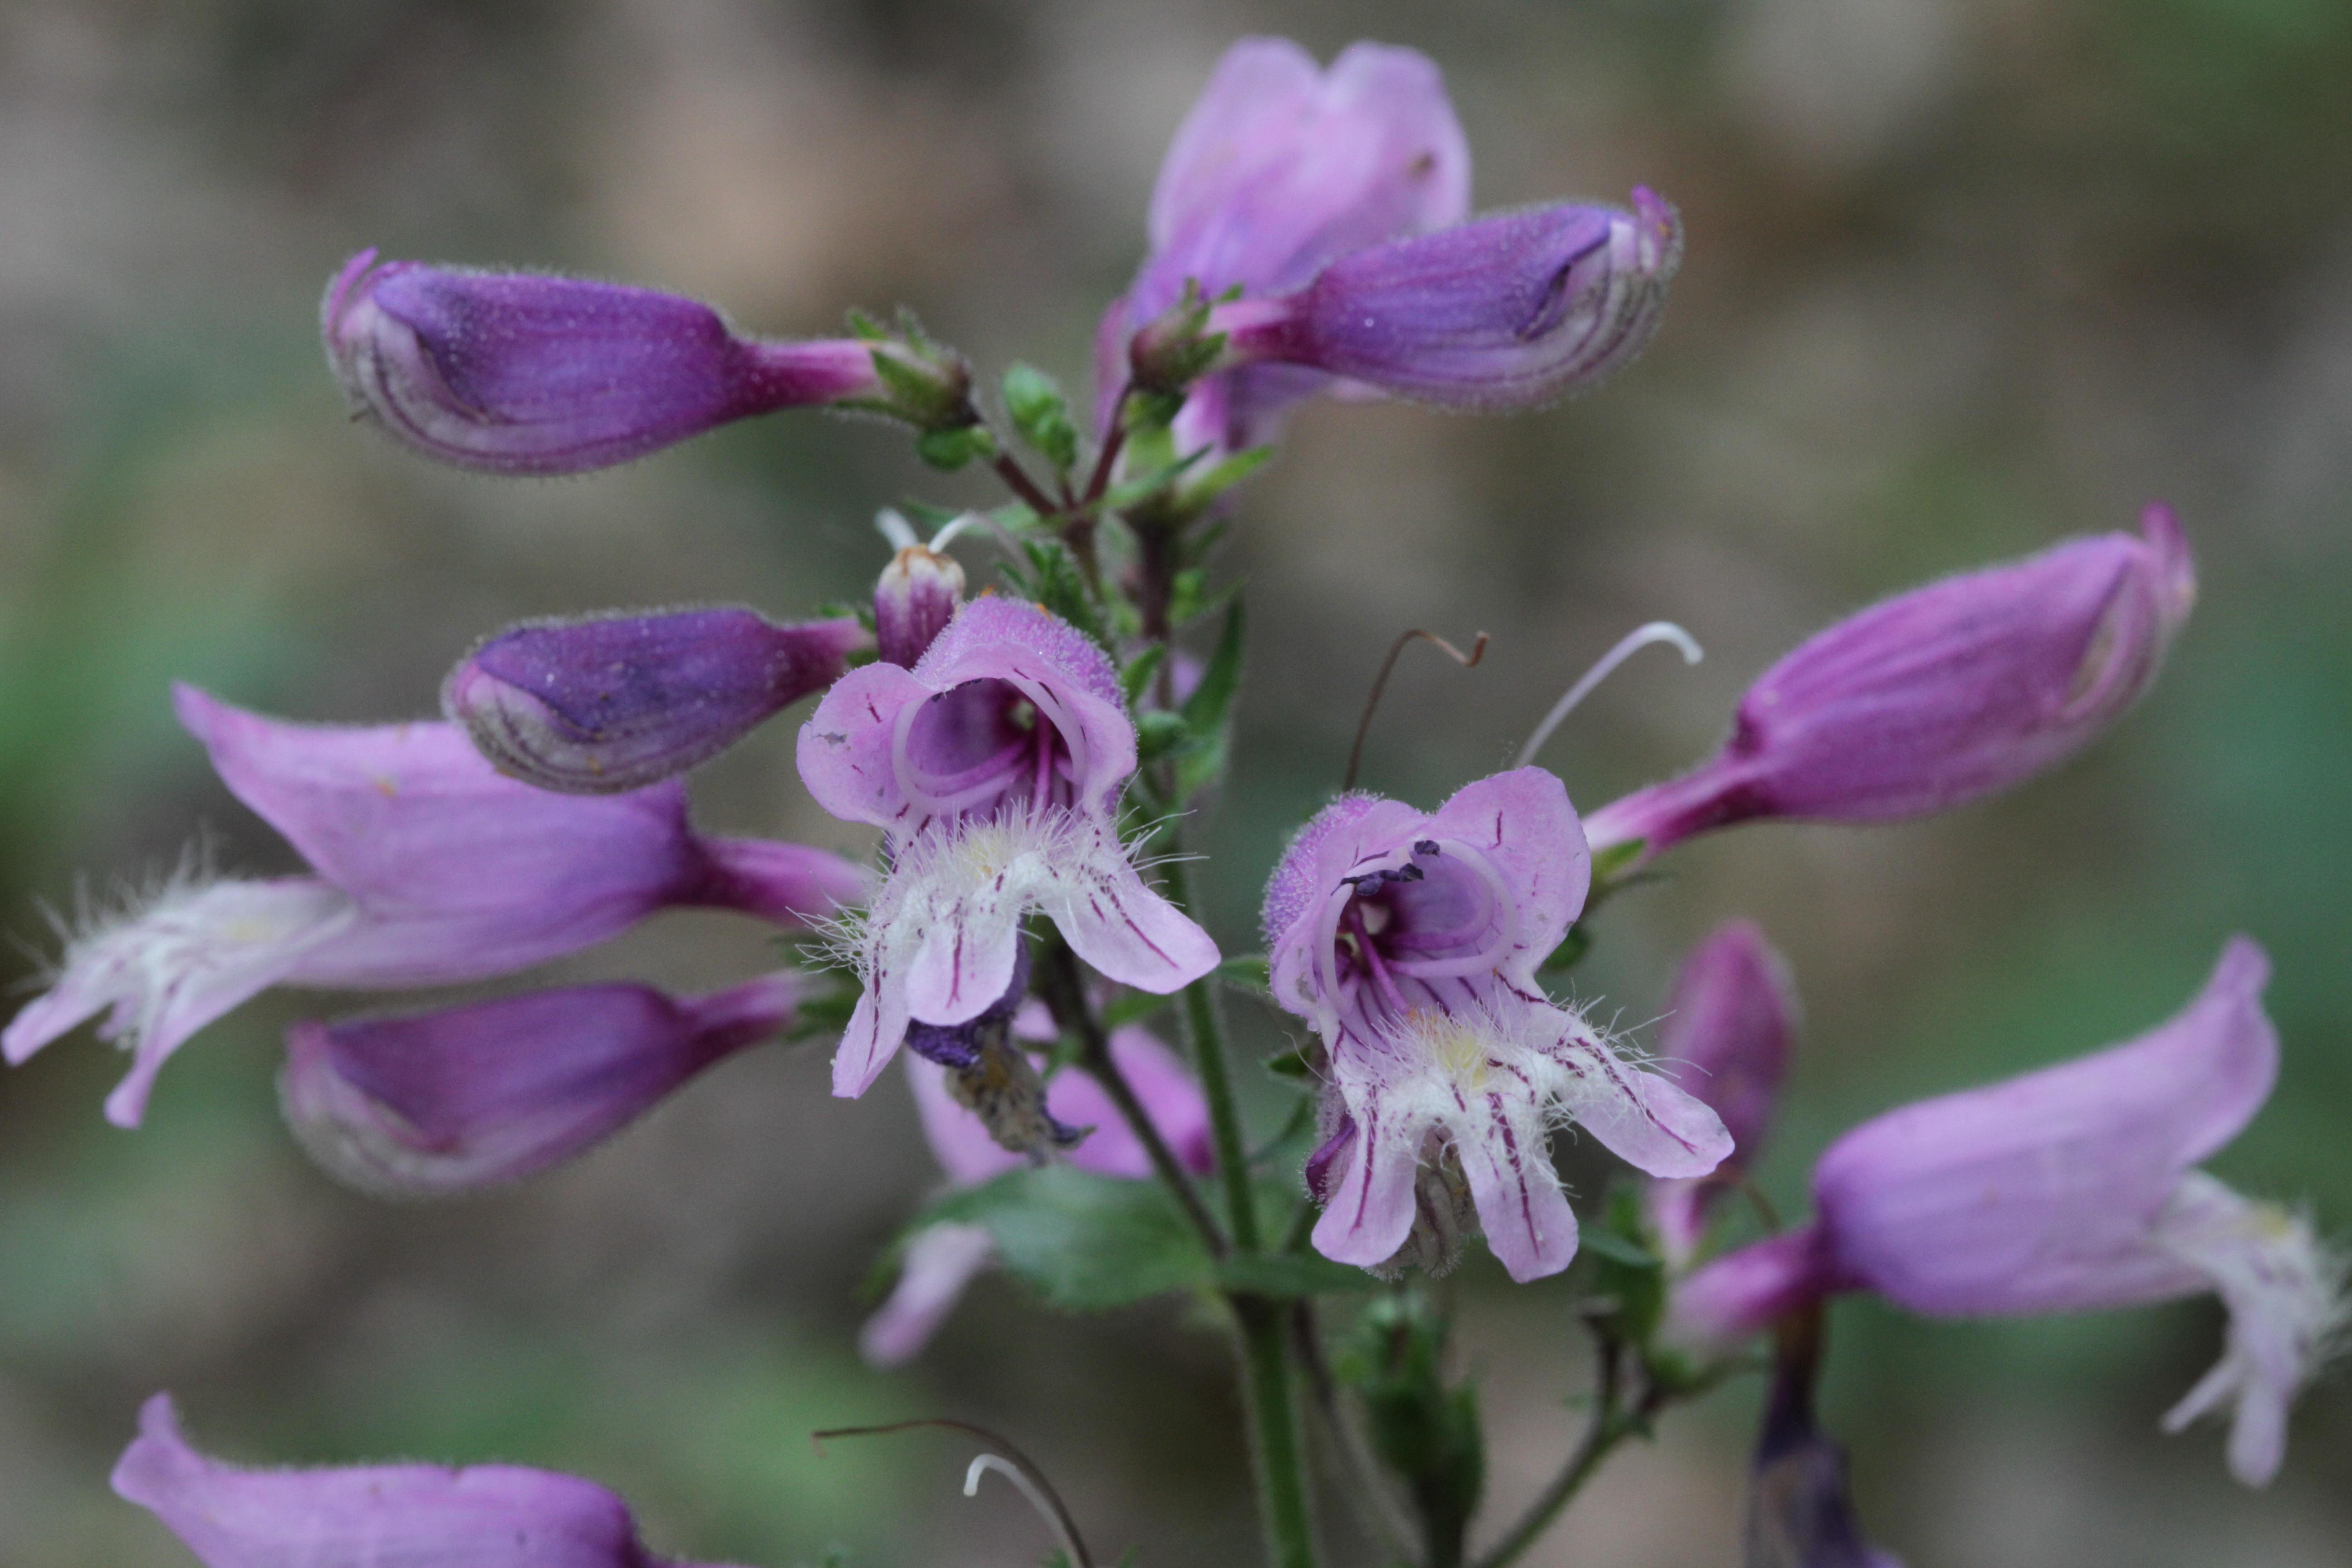 The Scientific Name is Penstemon smallii. You will likely hear them called Small's Beardtongue, Blue Ridge Beardtongue. This picture shows the Blossoms are lavender and open throated, the lower lobe with bright purple lines and  long white hairs forming a bristly beard. of Penstemon smallii